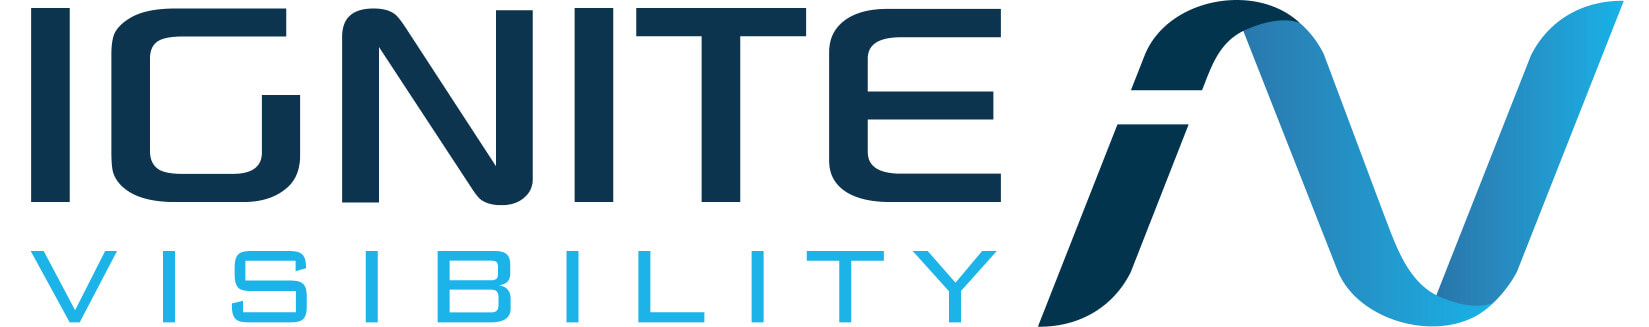 Best SEO Firm Logo: Ignite Visibility